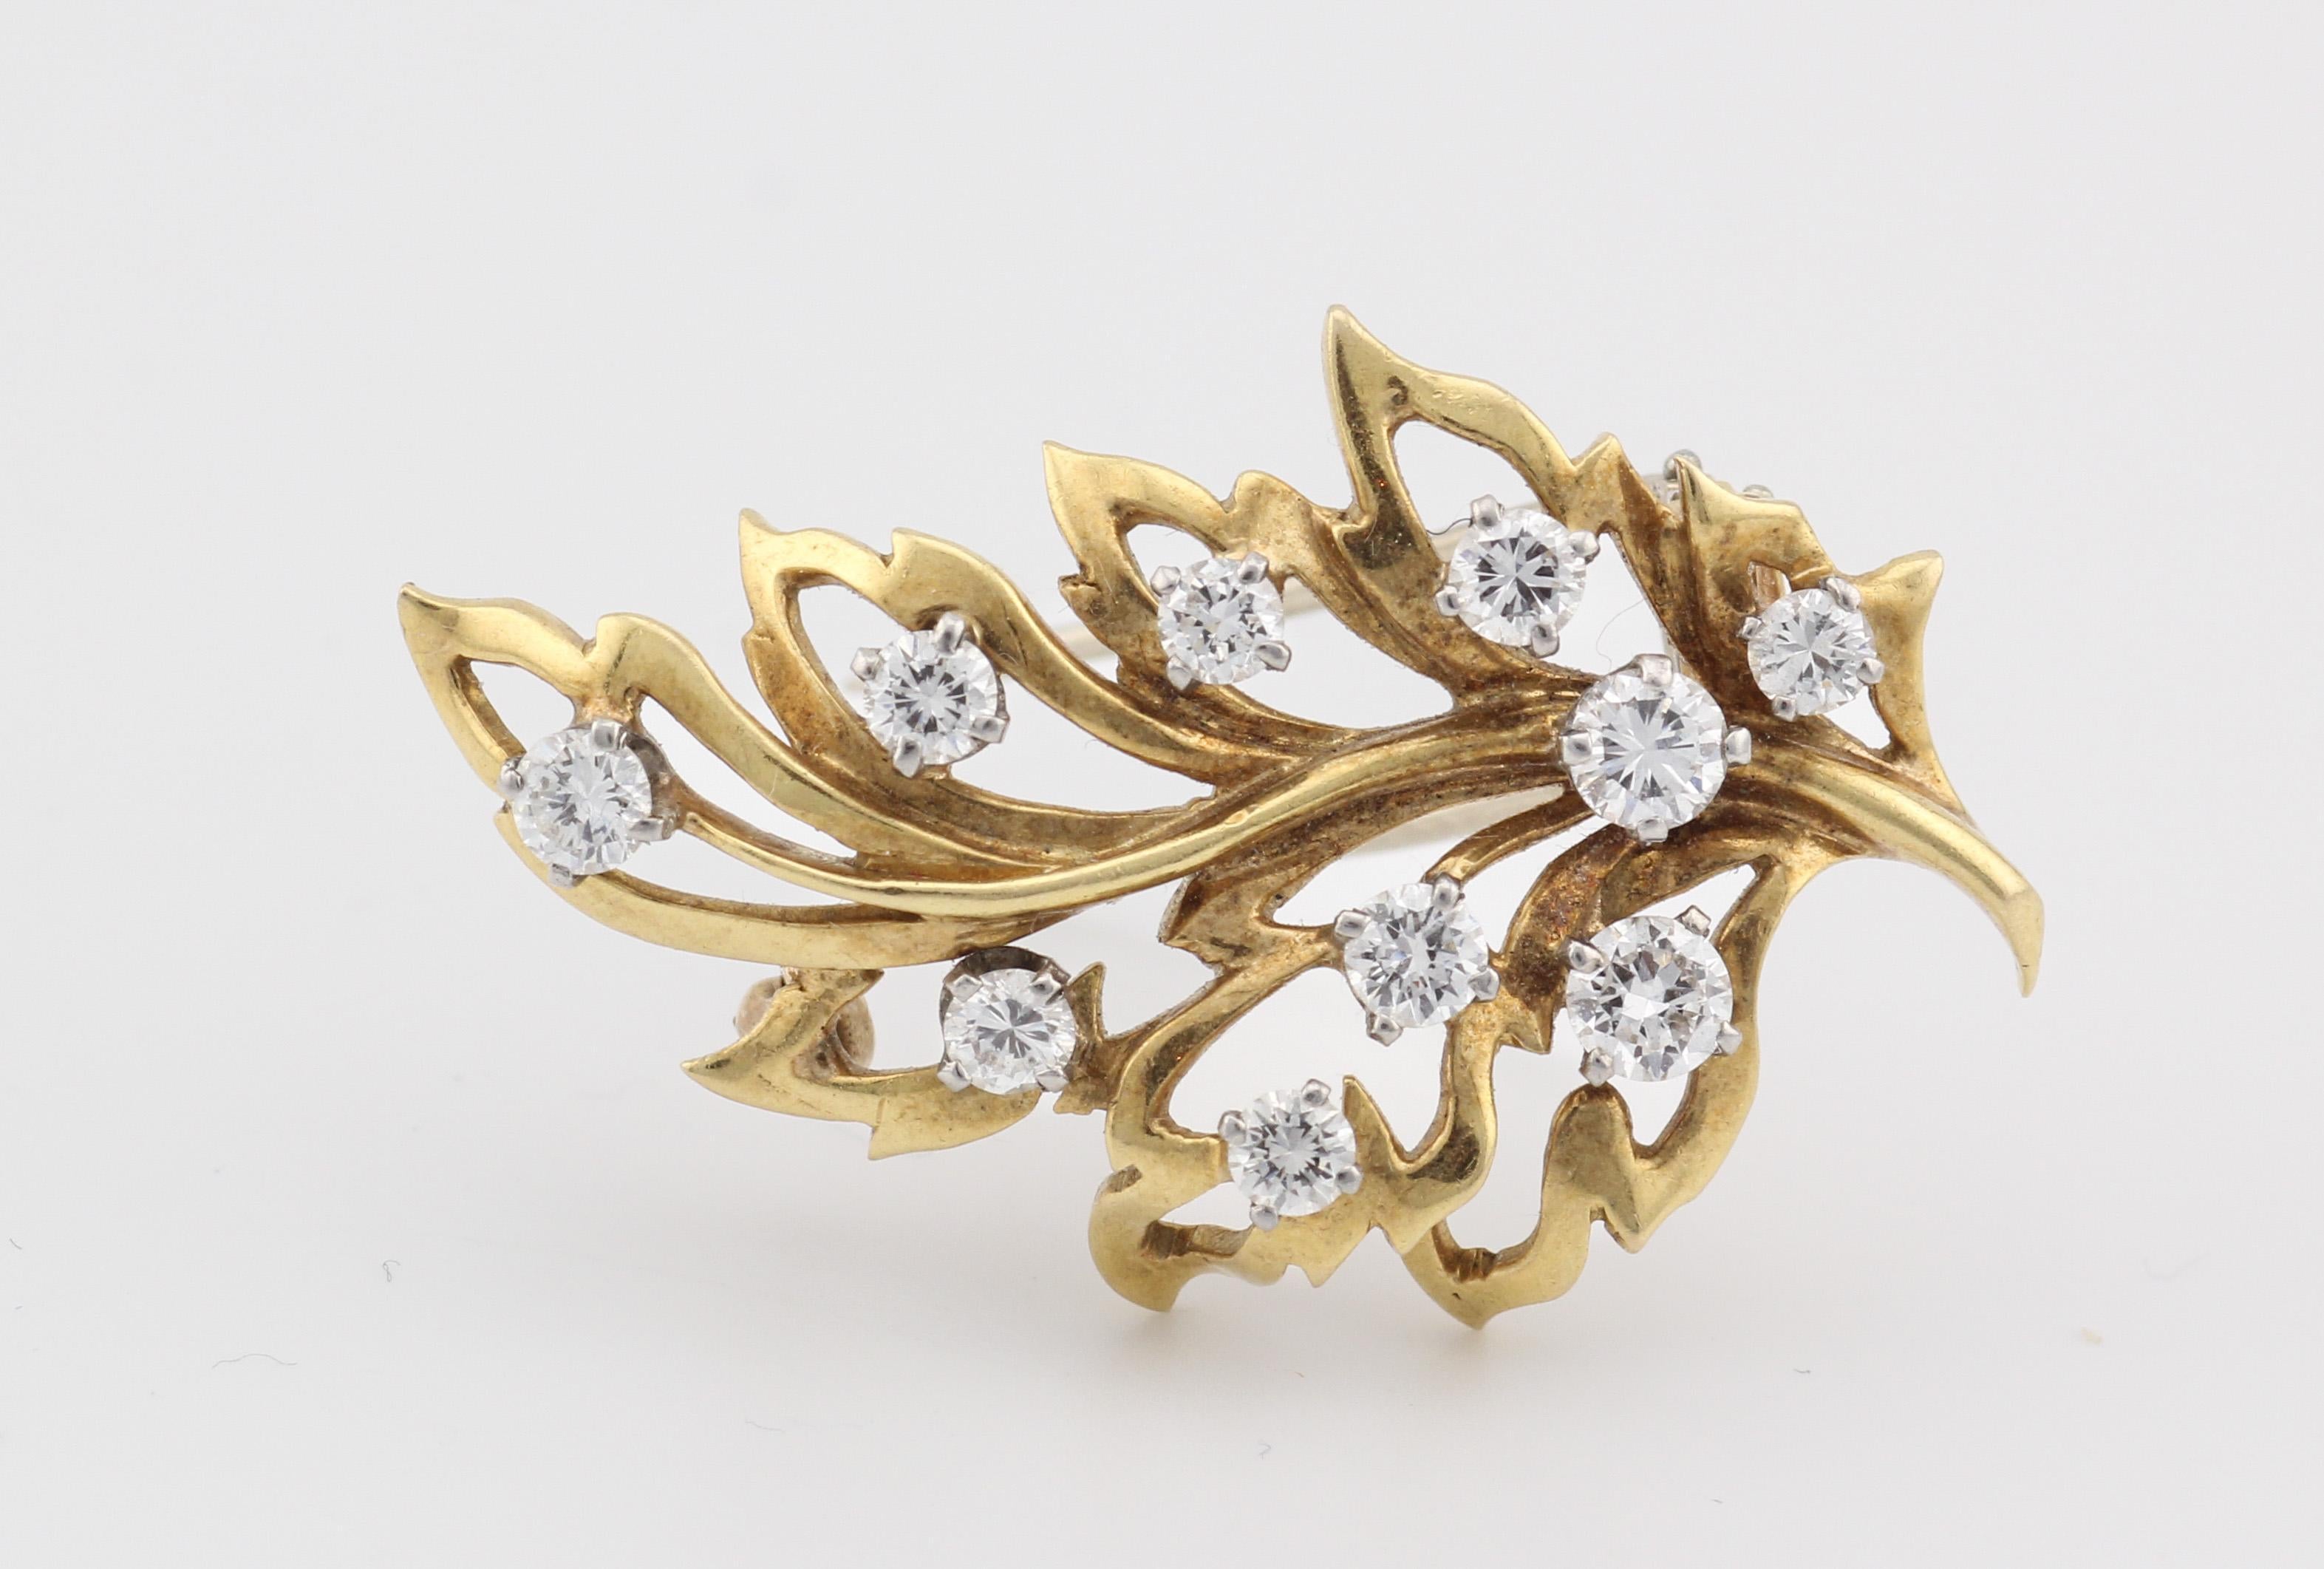 The Van Cleef & Arpels Diamond 18K Yellow Gold Leaf Brooch is a masterpiece of craftsmanship and elegance, showcasing the renowned sophistication of the esteemed jewelry house. Crafted from luxurious 18K yellow gold, this brooch features a